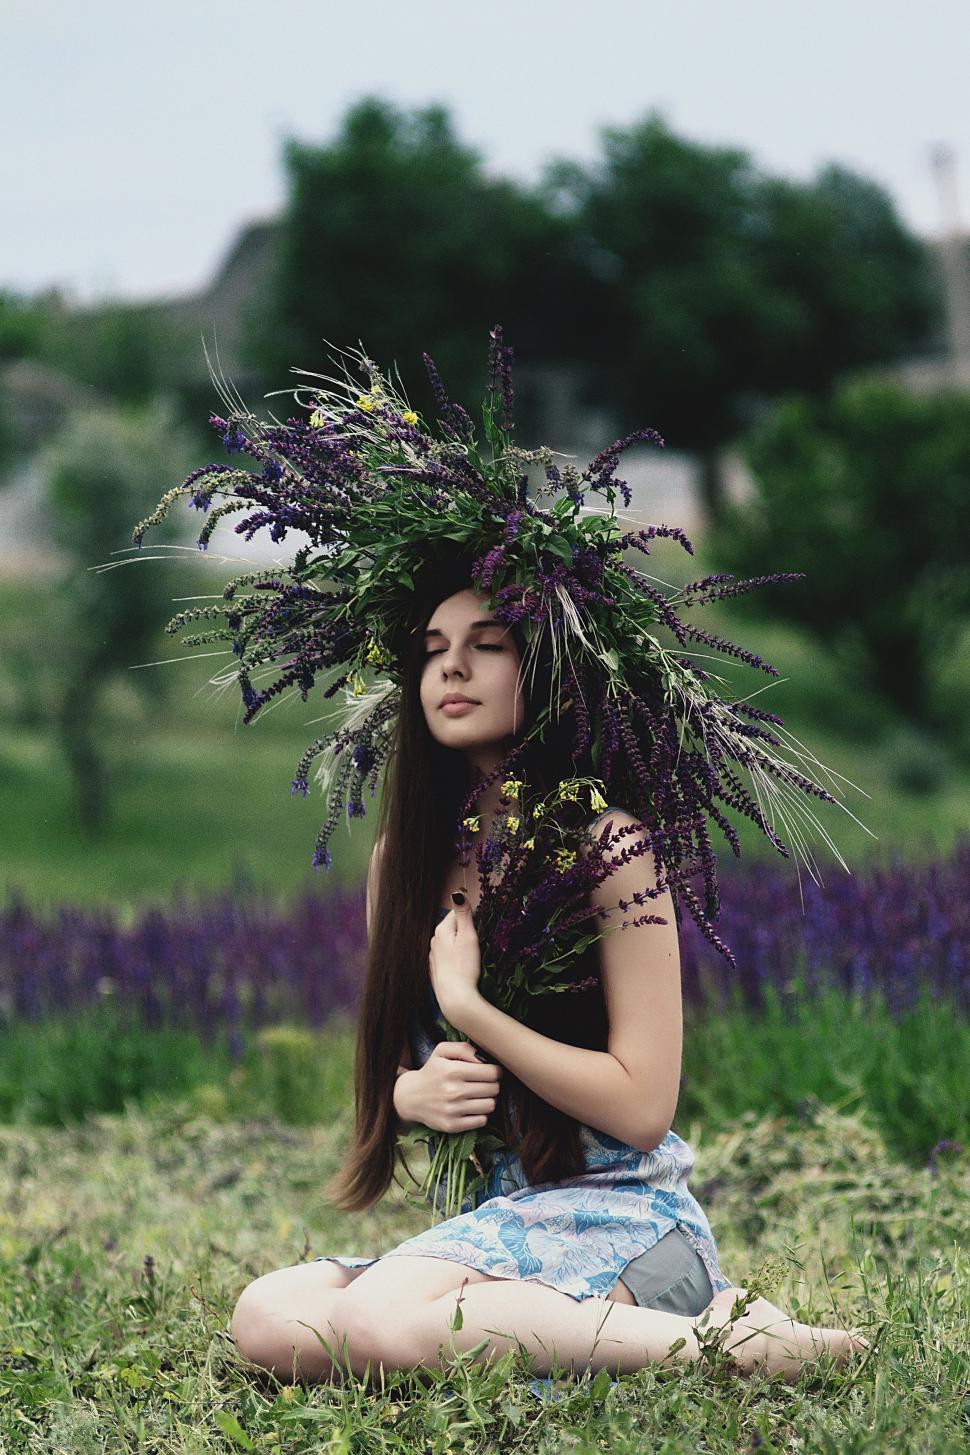 Free Image of Woman Sitting in Field With Flowers on Head 